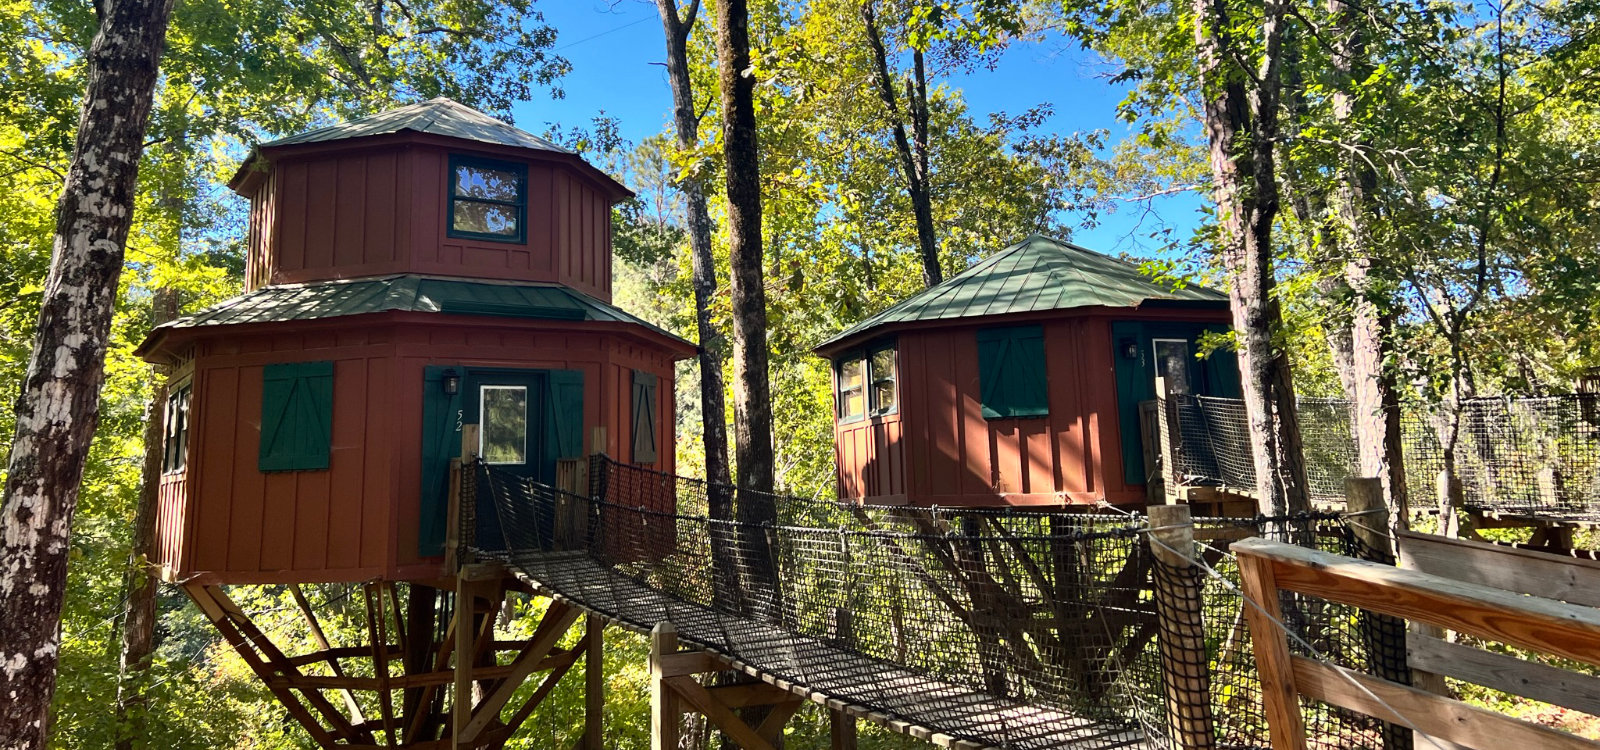 Tree House Rentals in Georgia at Historic Banning Mills